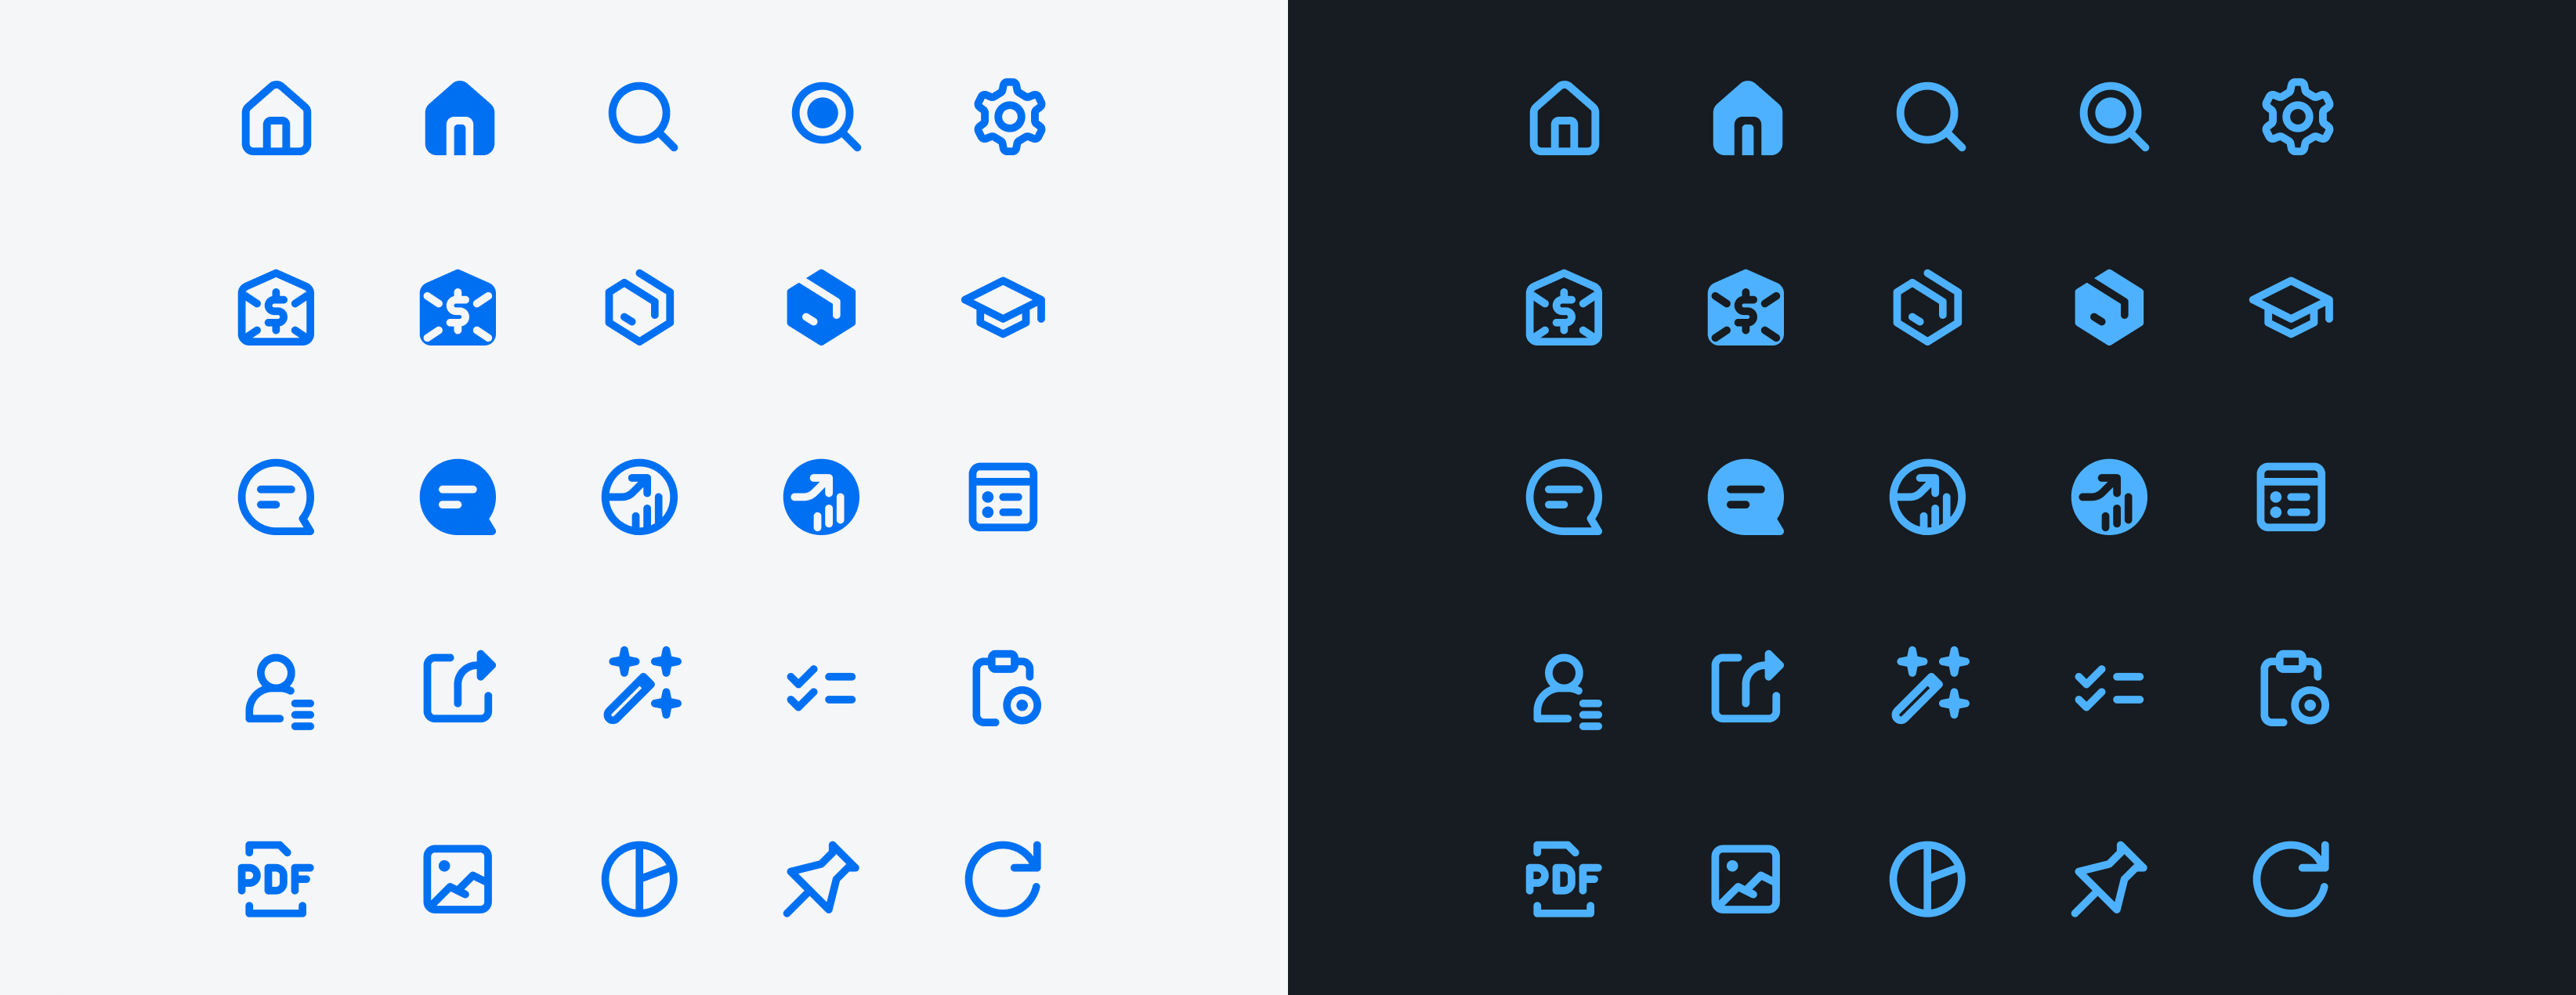 Example of the new iconography